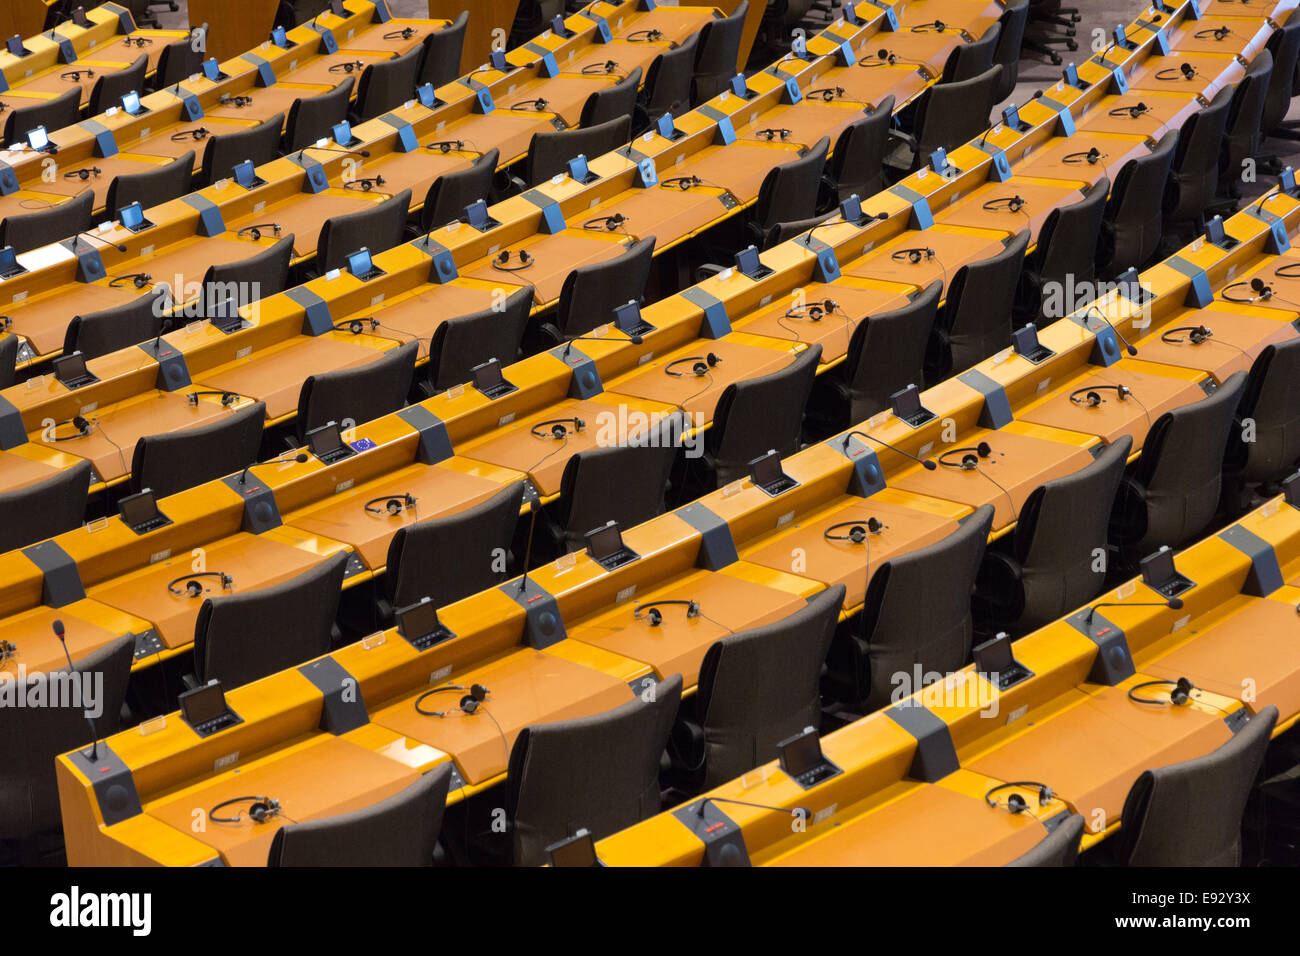 The European Parliament Room (debating chamber) in Brussels. Stock Photo